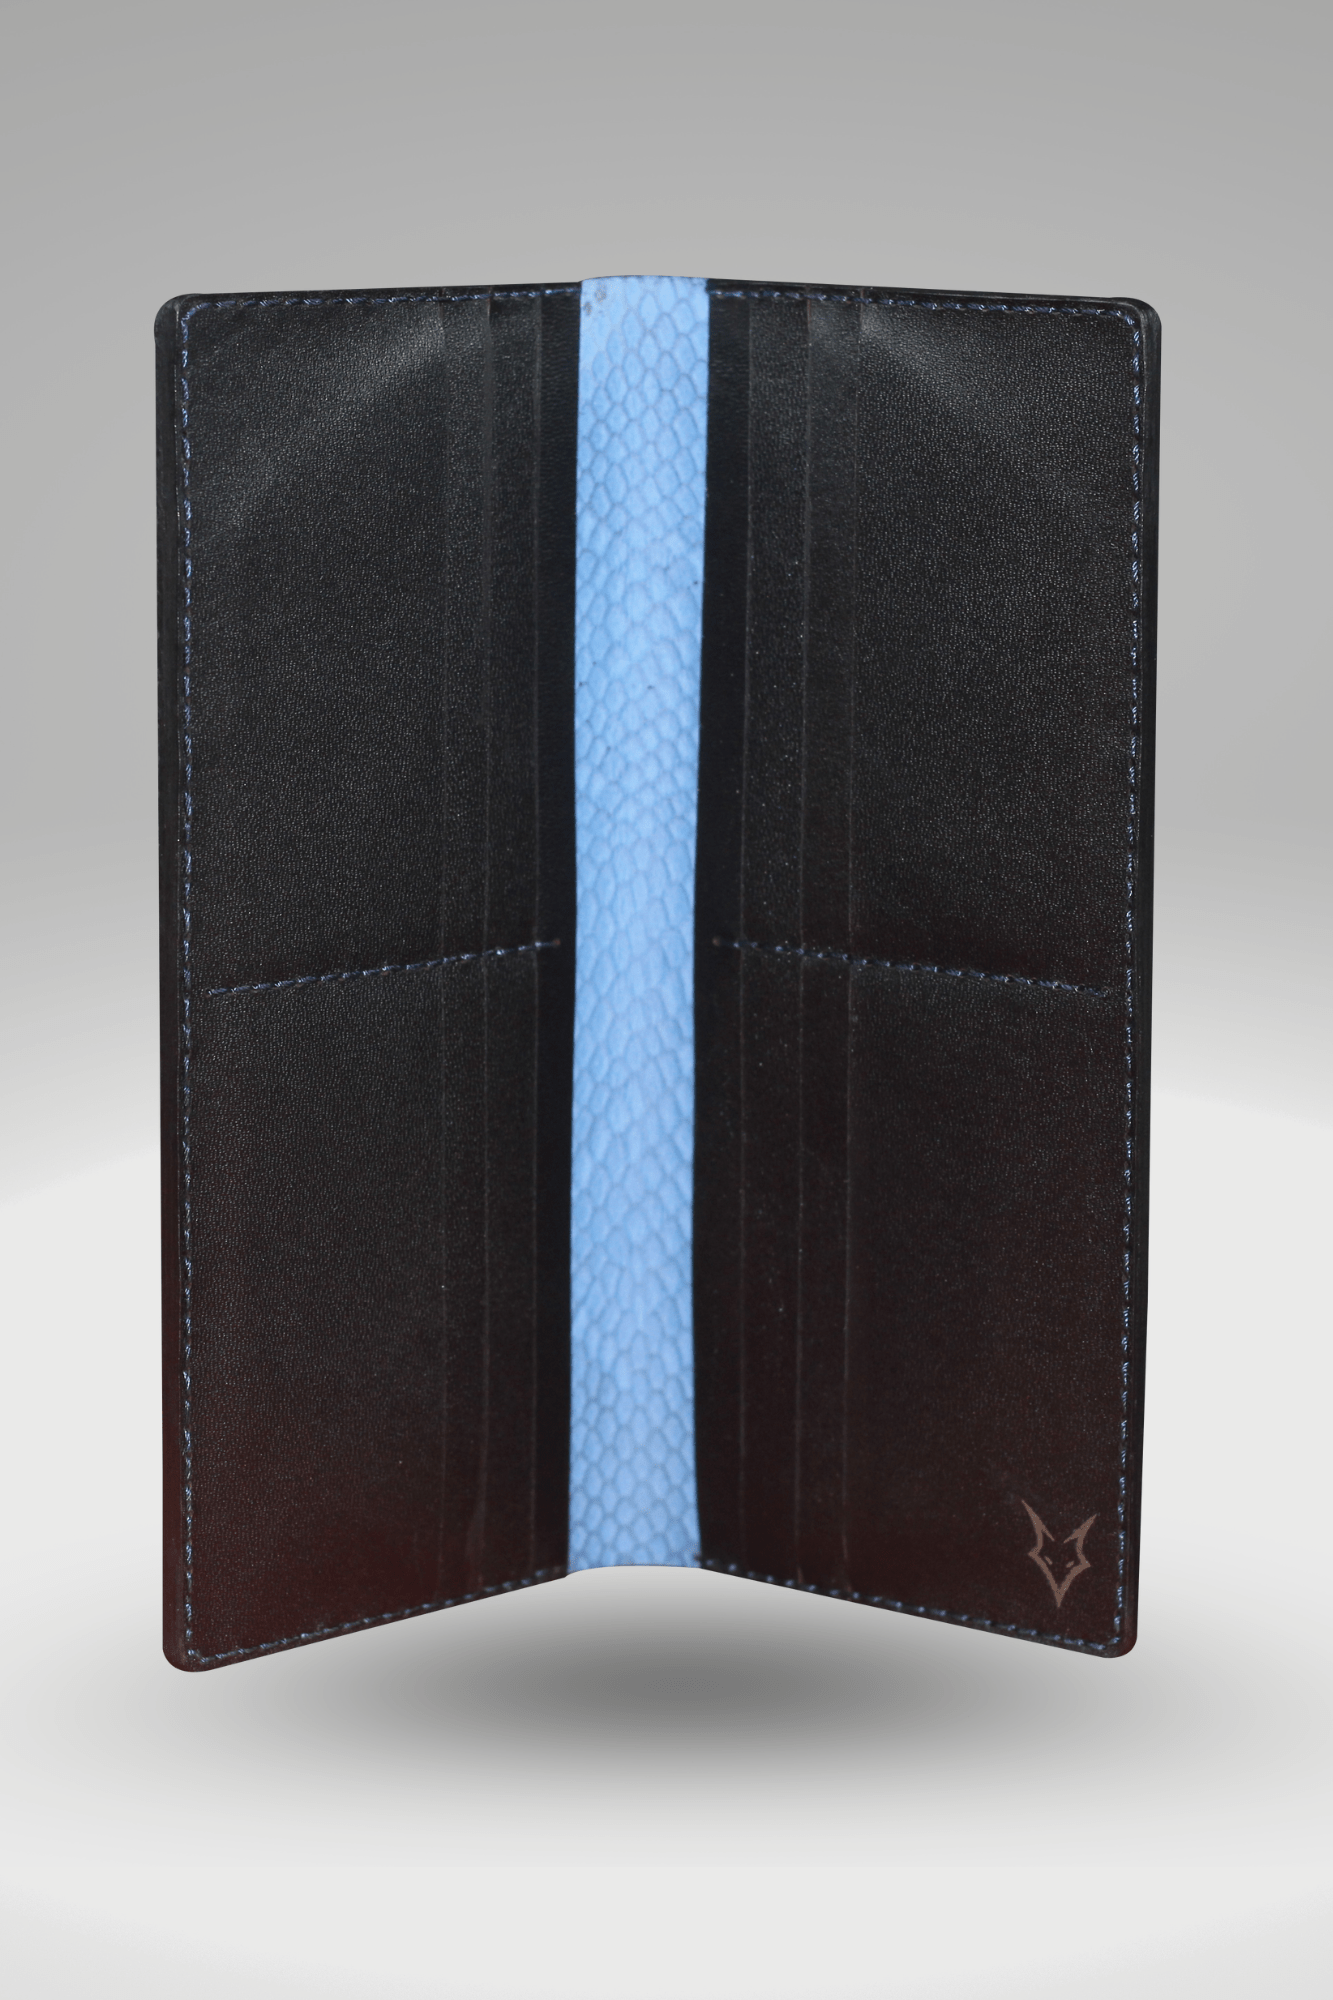 Unisex Genuine Leather Wallet With Blue Python Textured Finish